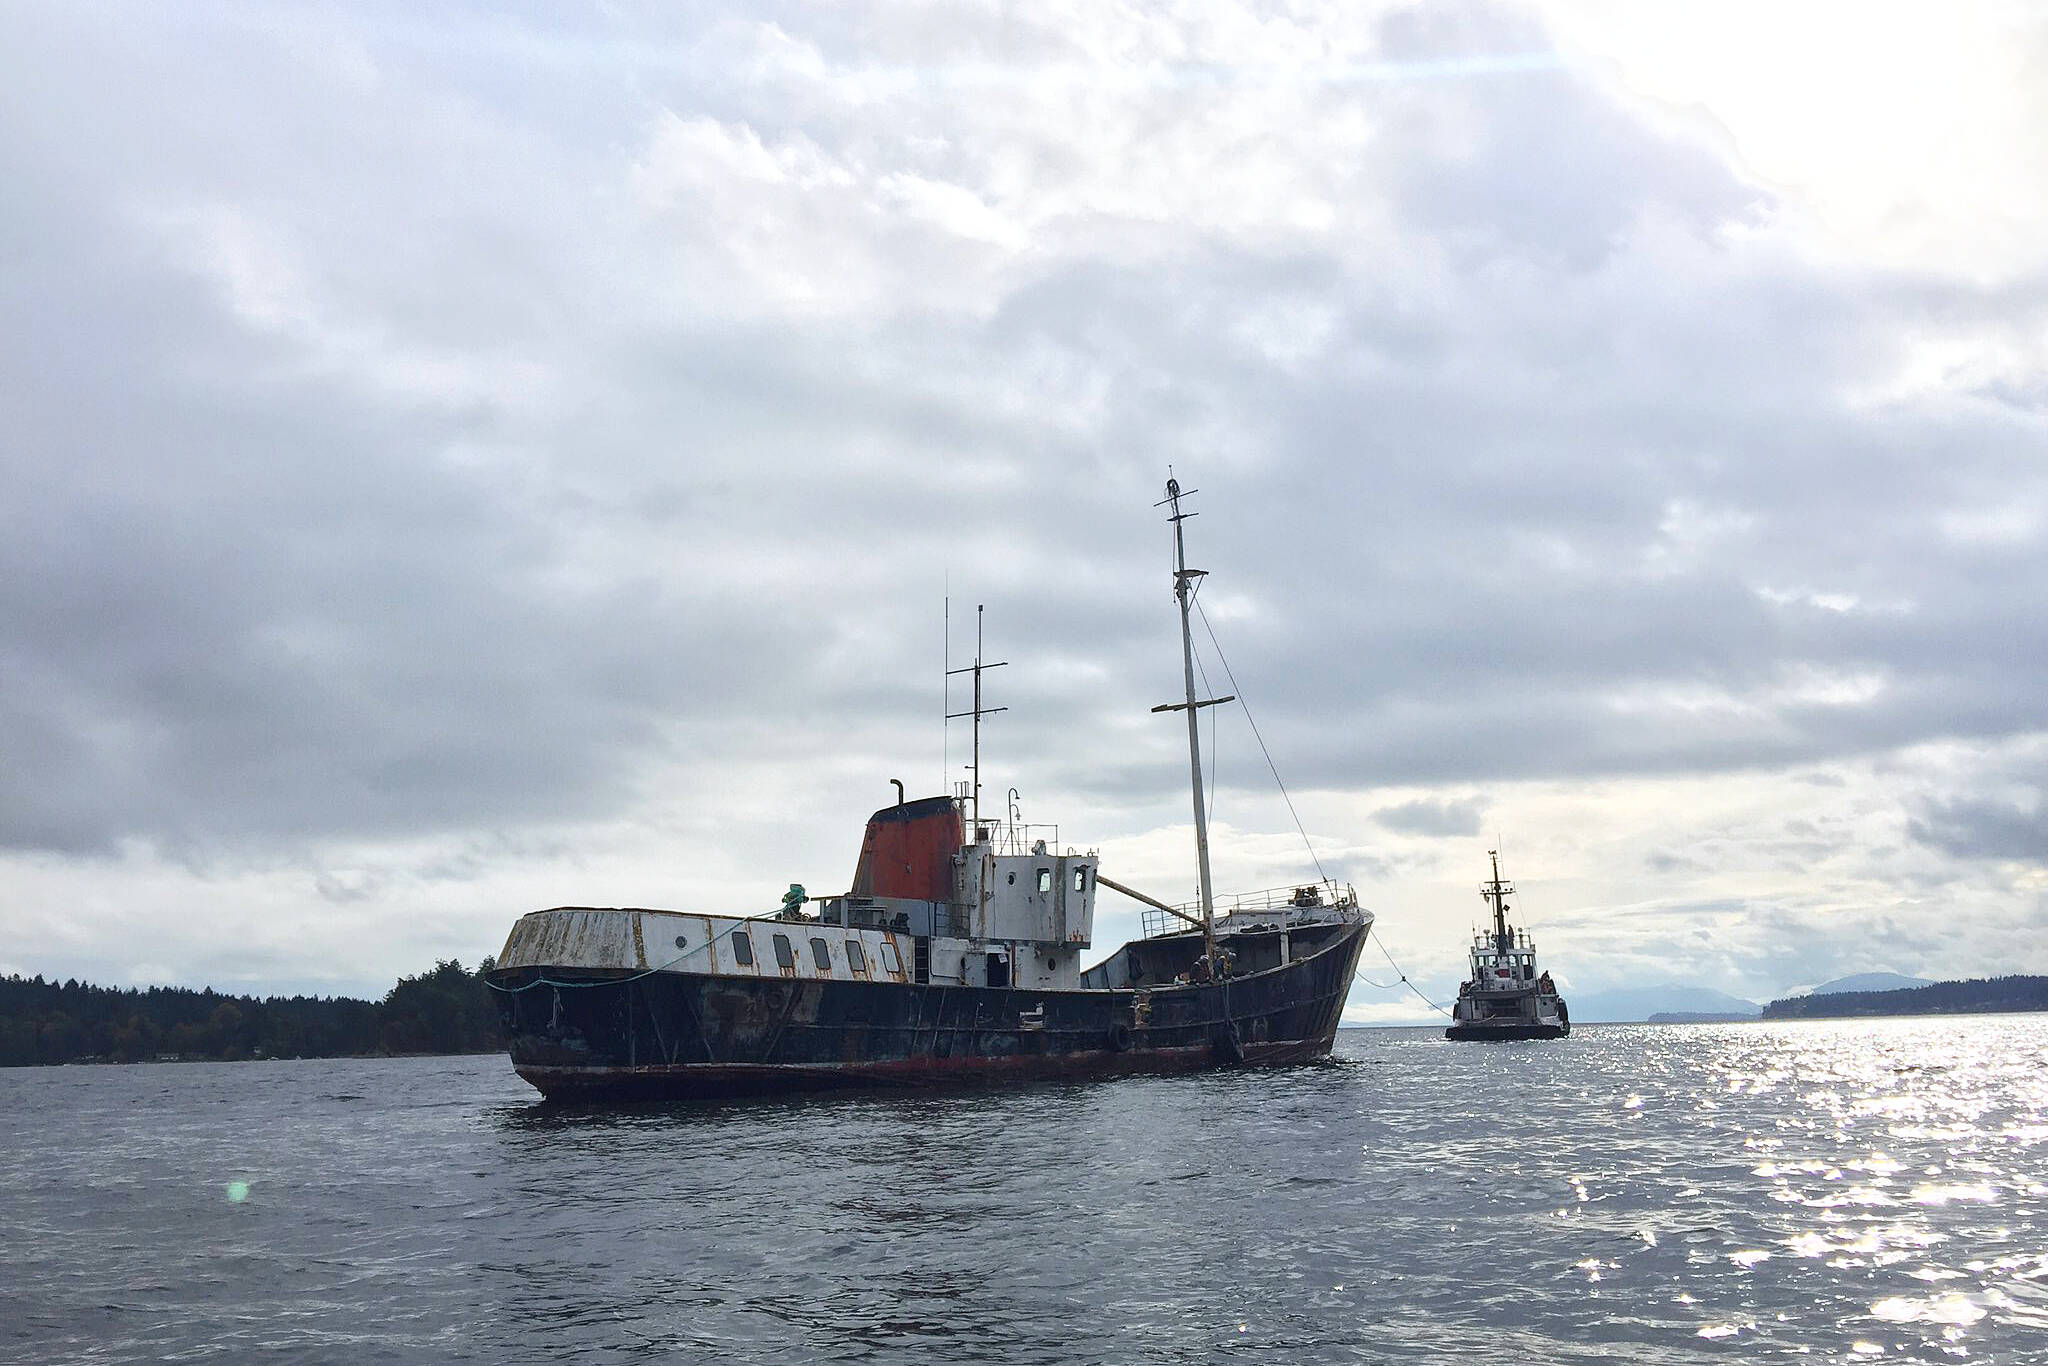 In 2016, it cost $1.2 million to remove the Viki Lyne II from Ladysmith’s harbour - accounting for nearly twice the 2023 budget currently allocated to Transport Canada for the disposal of derelict vessels. (Photo from Aaron Stone’s X account)